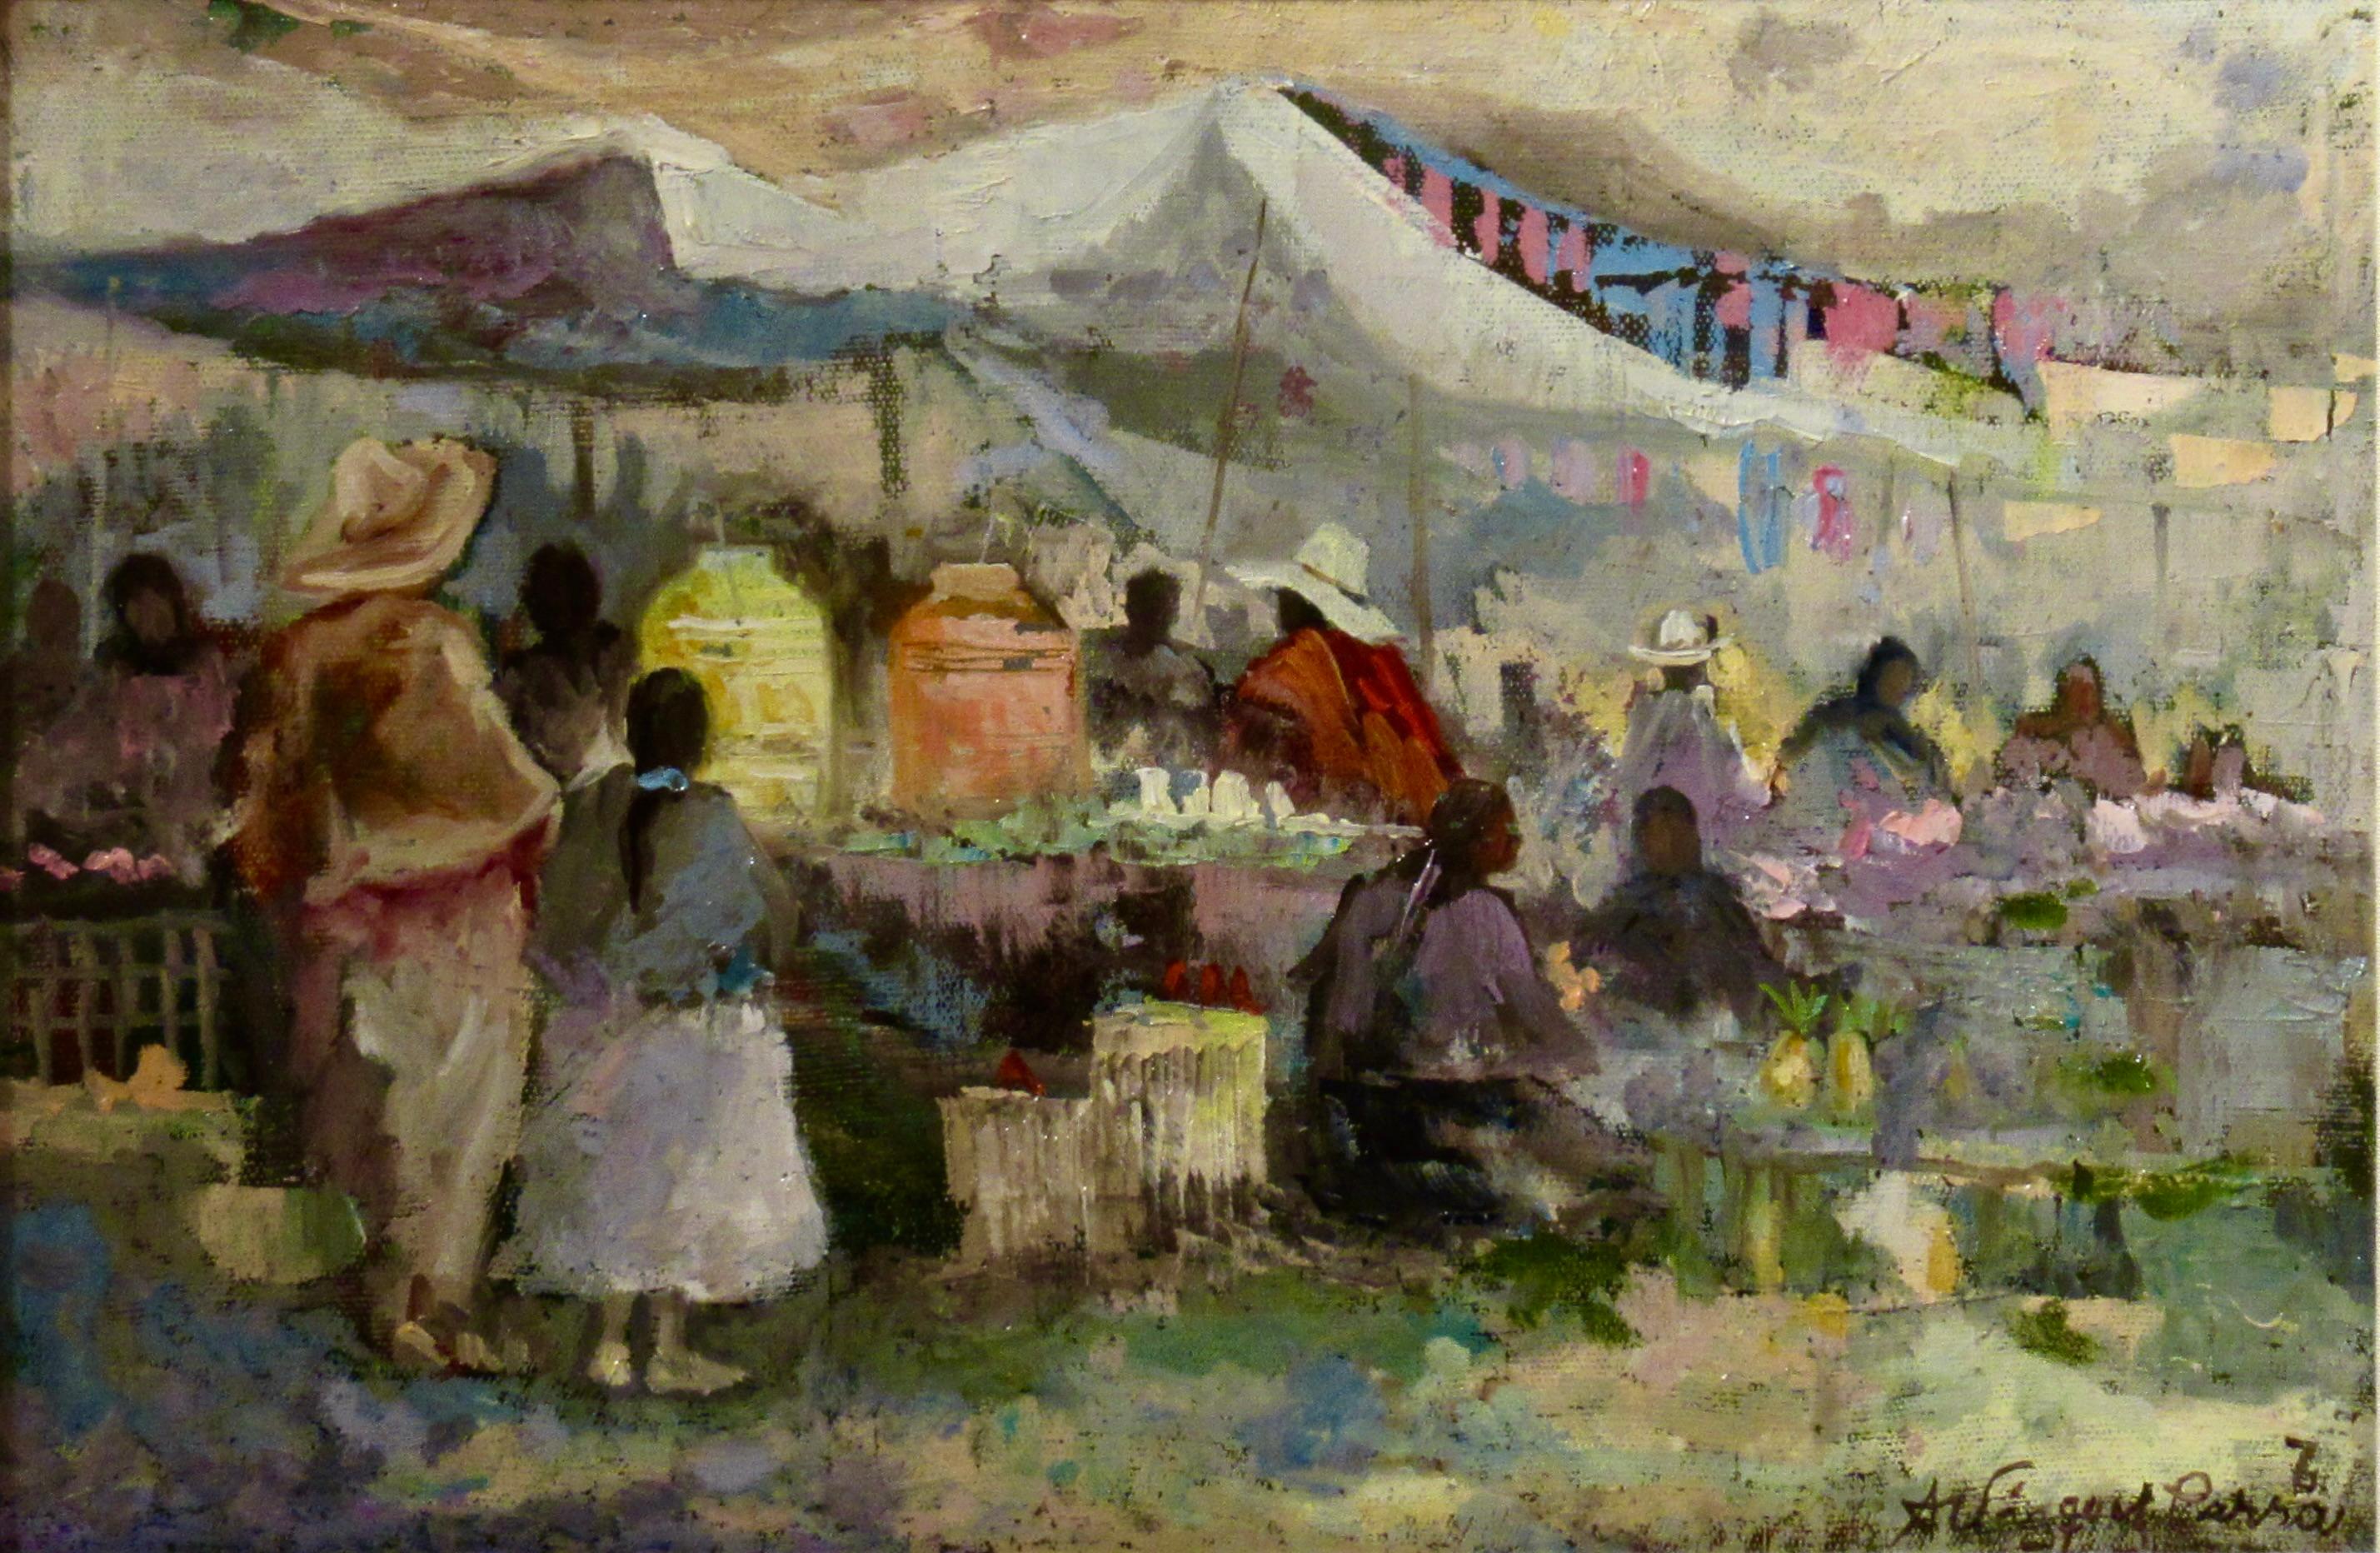 Mexican Market with Couple - Painting by Antonio Vasquez Parra